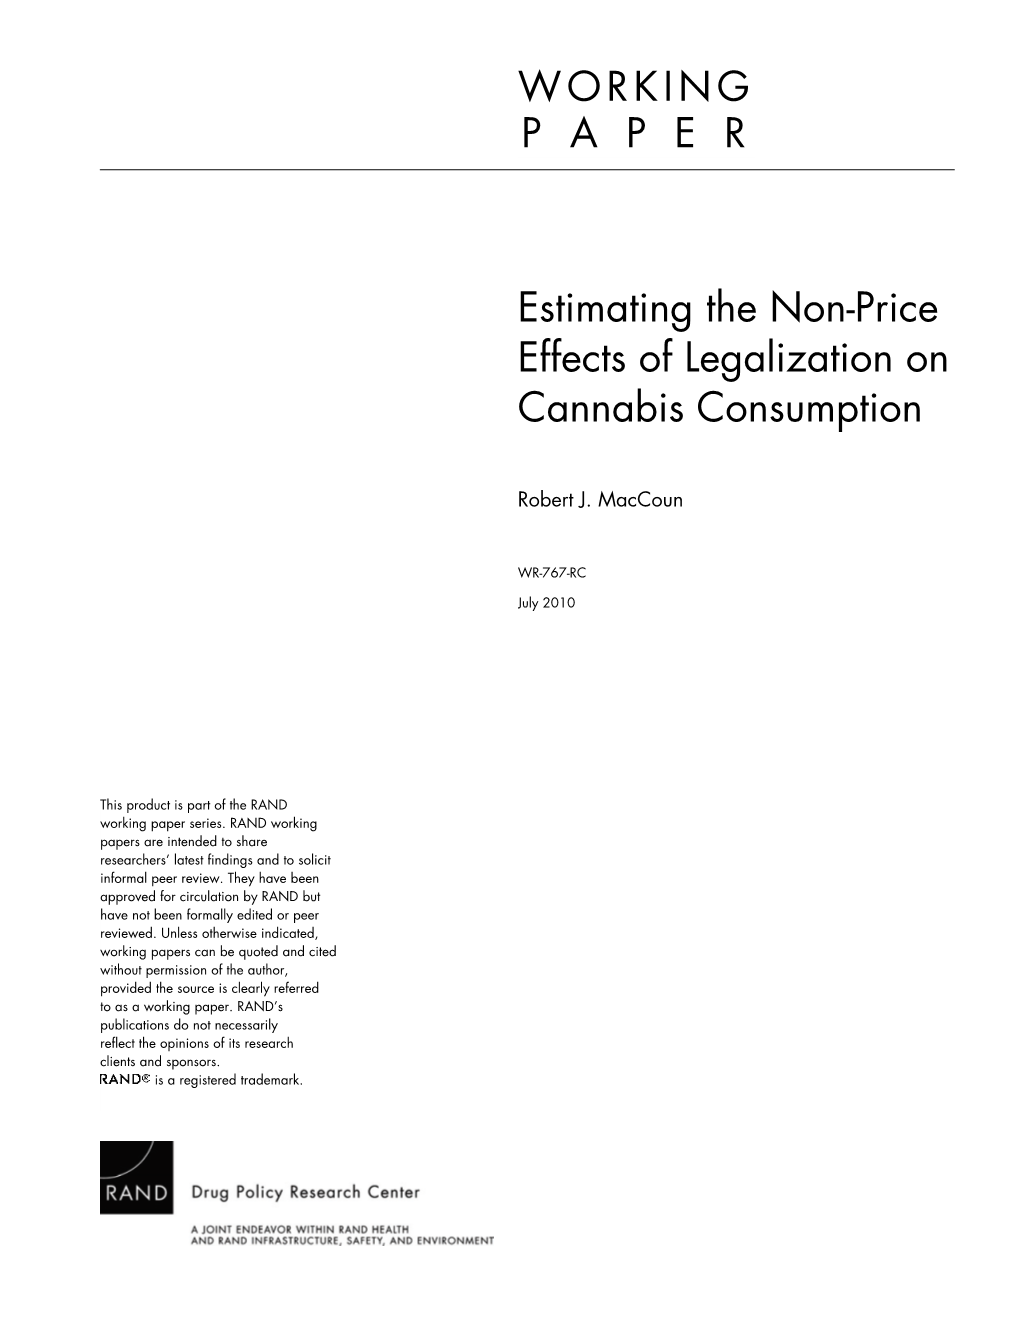 Estimating the Non-Price Effects of Legalization on Cannabis Consumption